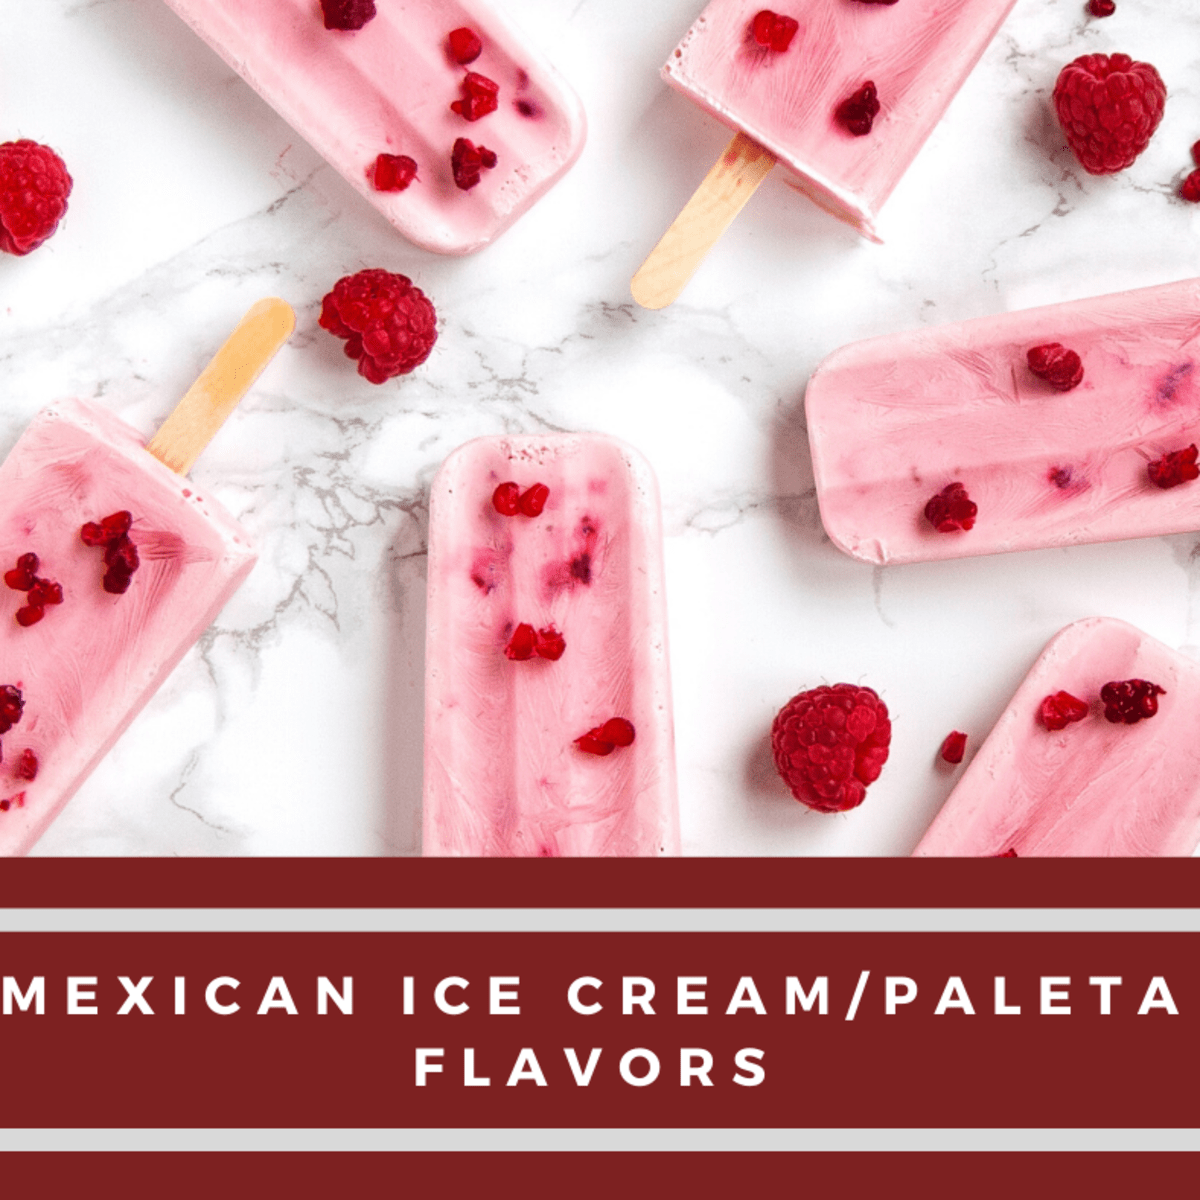 Mexican Ice Cream Paleta Flavors And Explanations In English Delishably